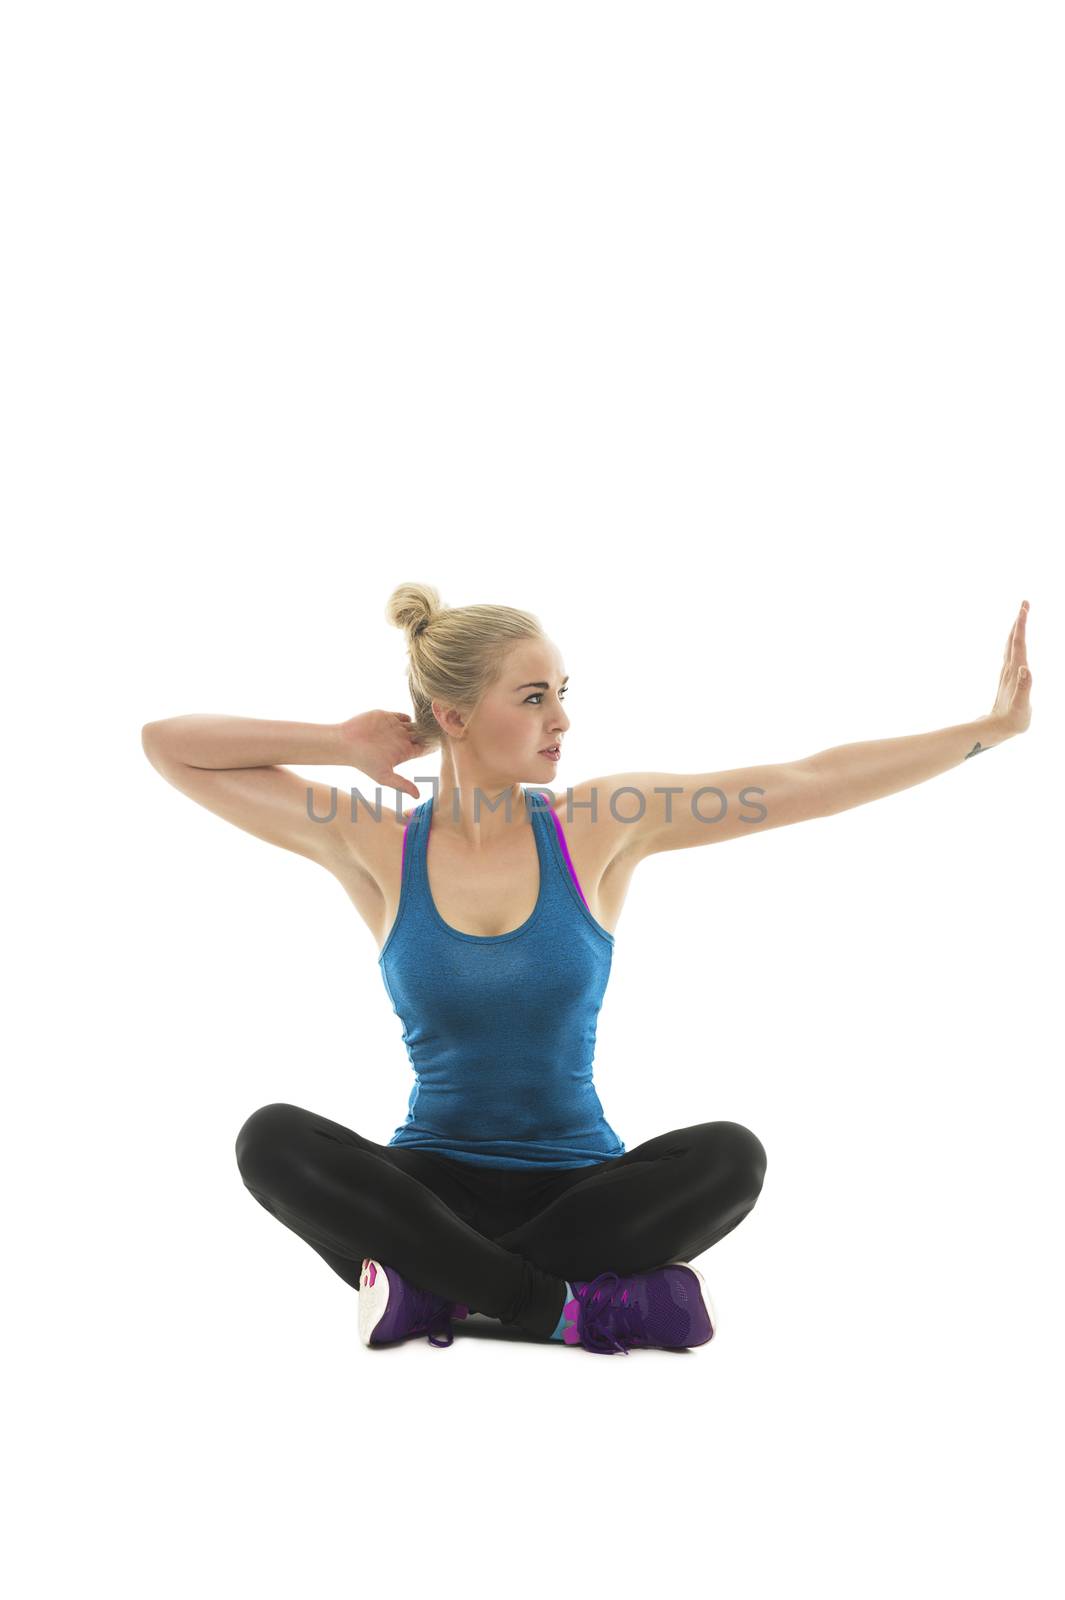 Attractive young woman working out doing yoga stretching exercises with her arms as she sits cross legged in the lotus position on the floor, over white